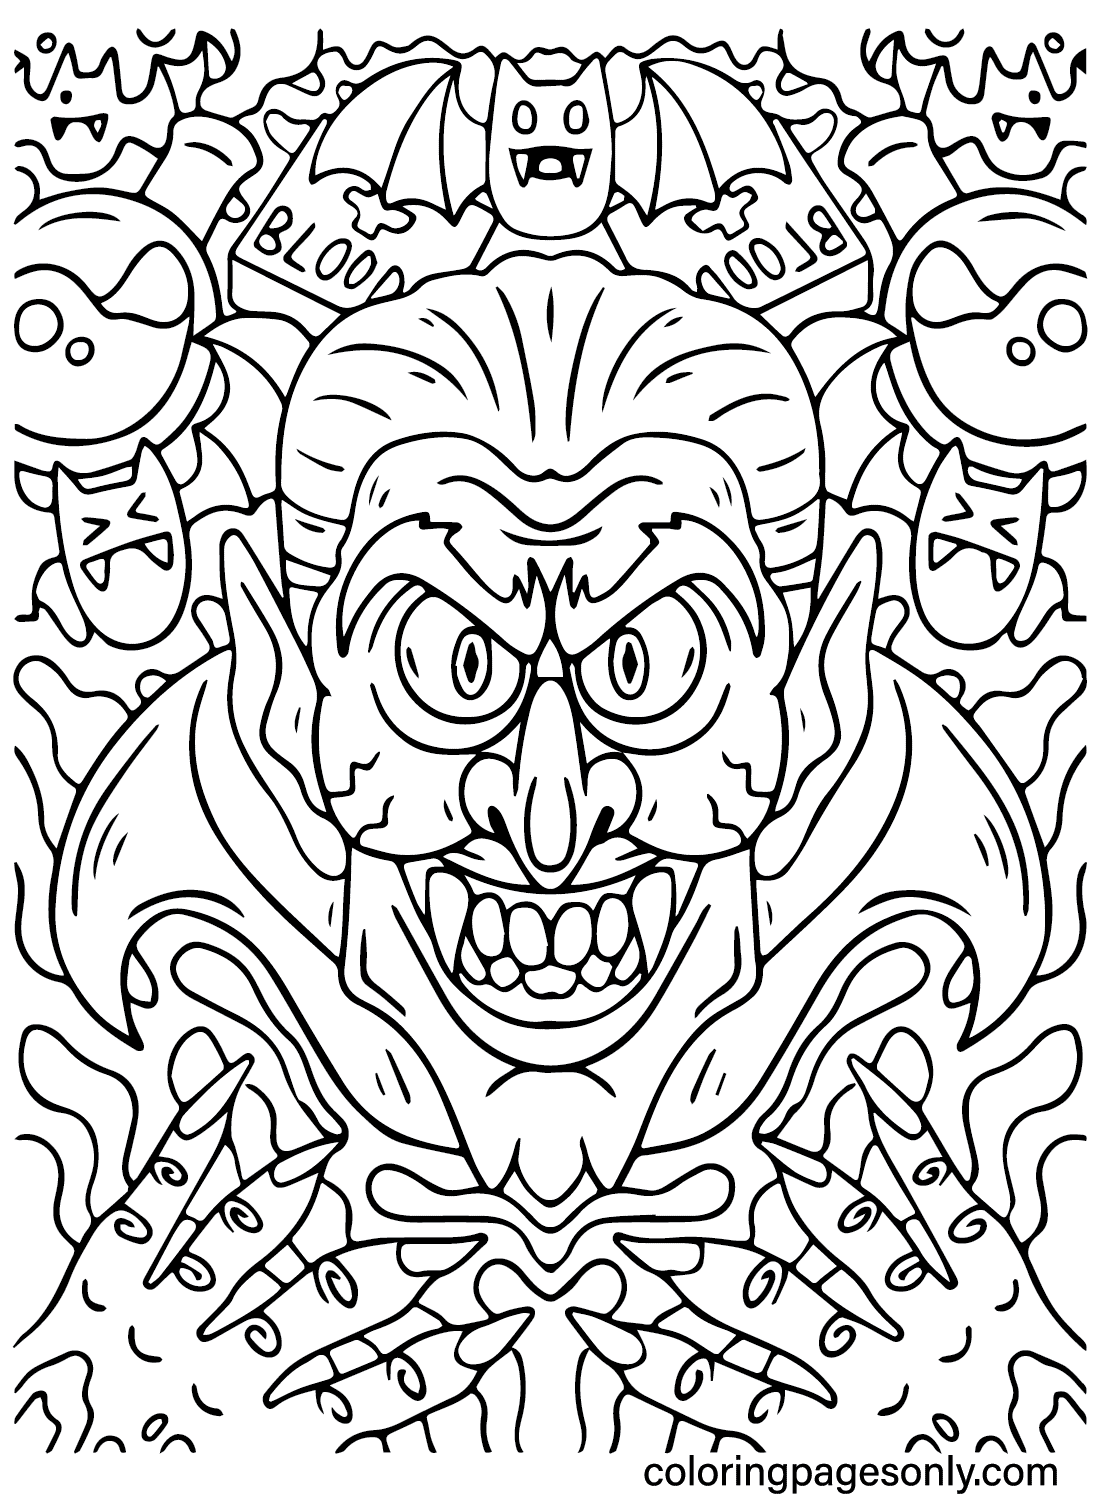 Coloring Sheet Scary Halloween from Scary Halloween